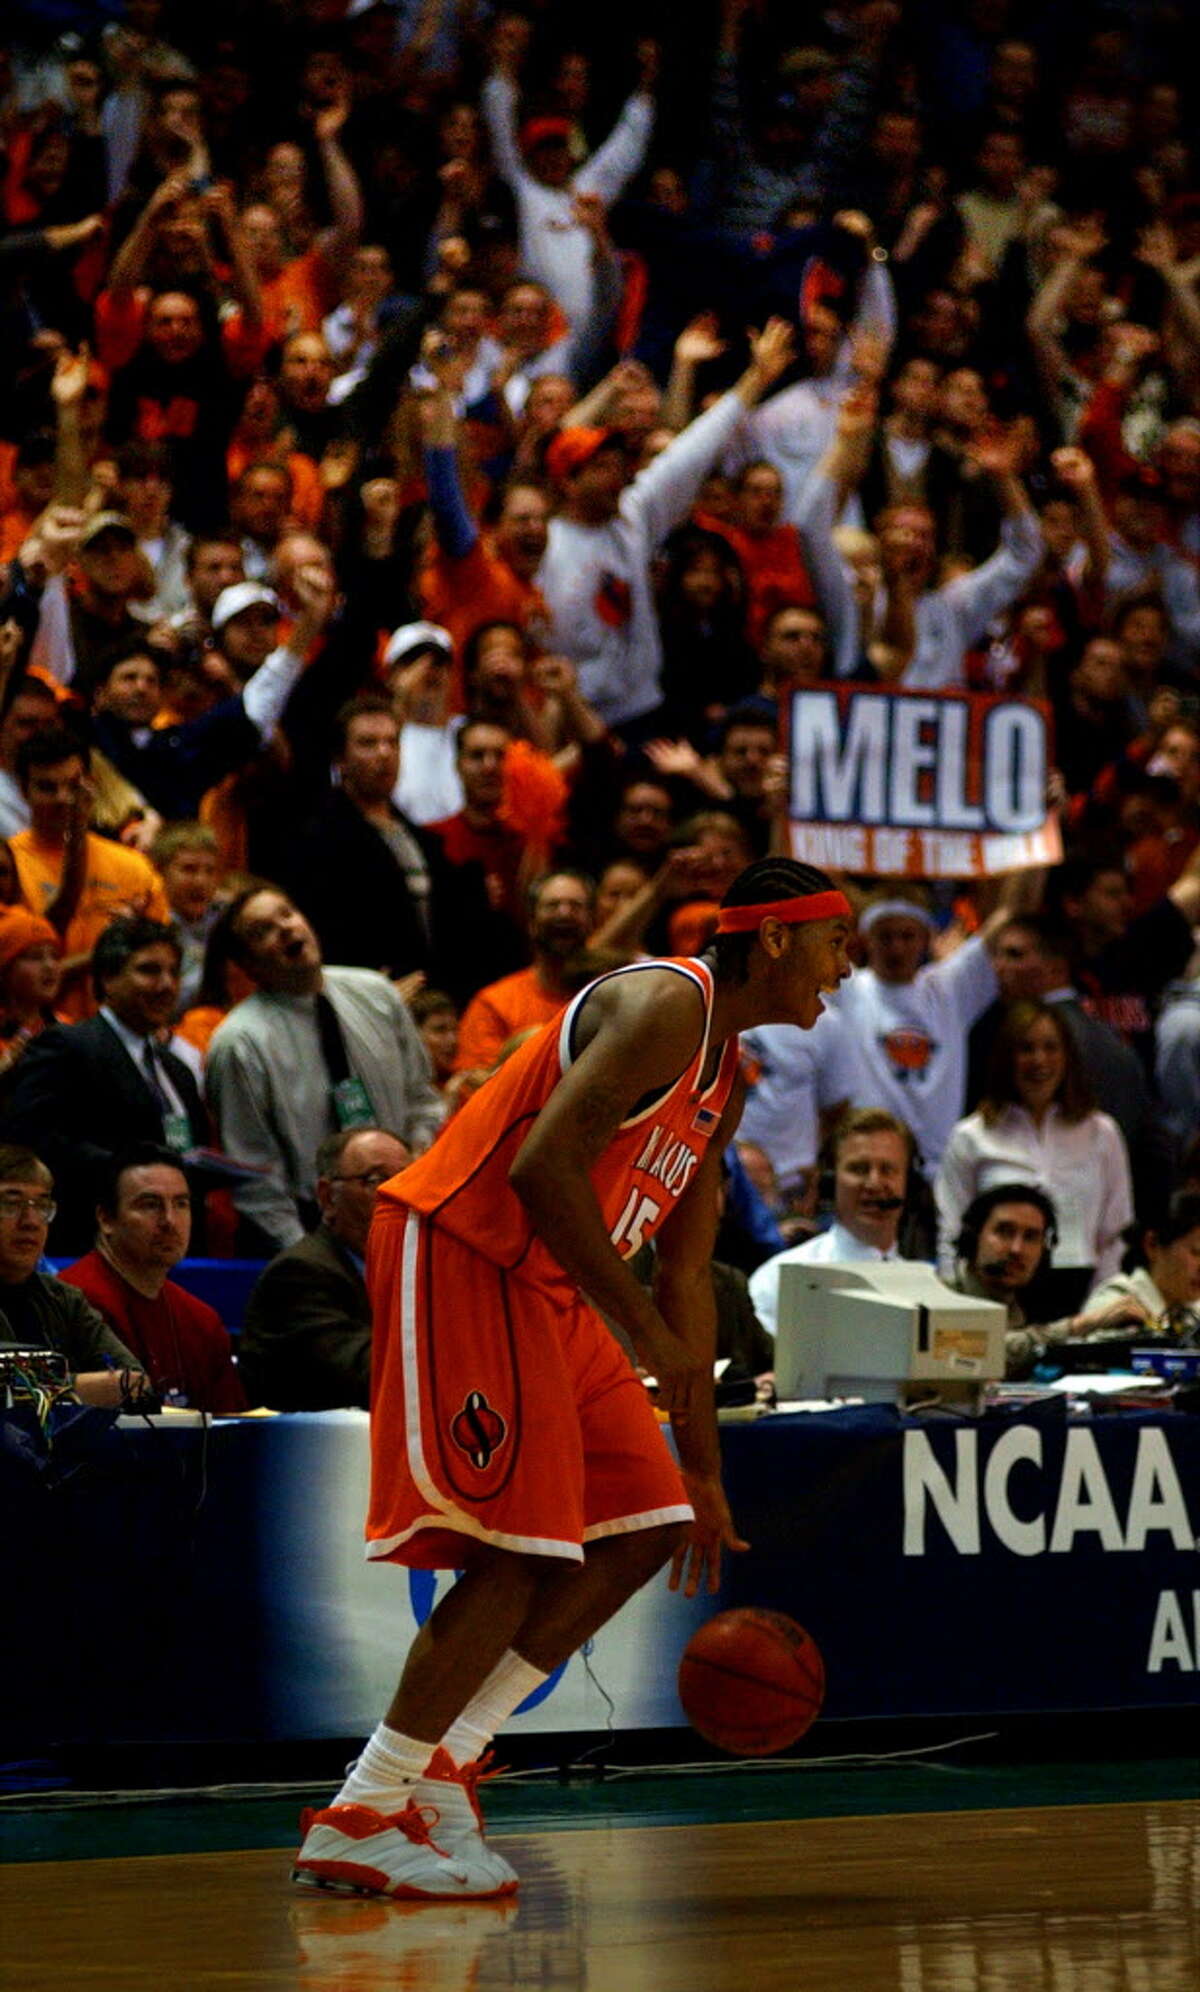 Times Union Staff photograph by Philip Kamrass -- Syracuse University forward Carmelo Anthony dribbles out the clock during the final seconds of his team's 63-47 victory over Oklahoma in the NCAA East Regional at the Pepsi Arena in Albany, NY Sunday March 30, 2003. Anthony was named MVP.